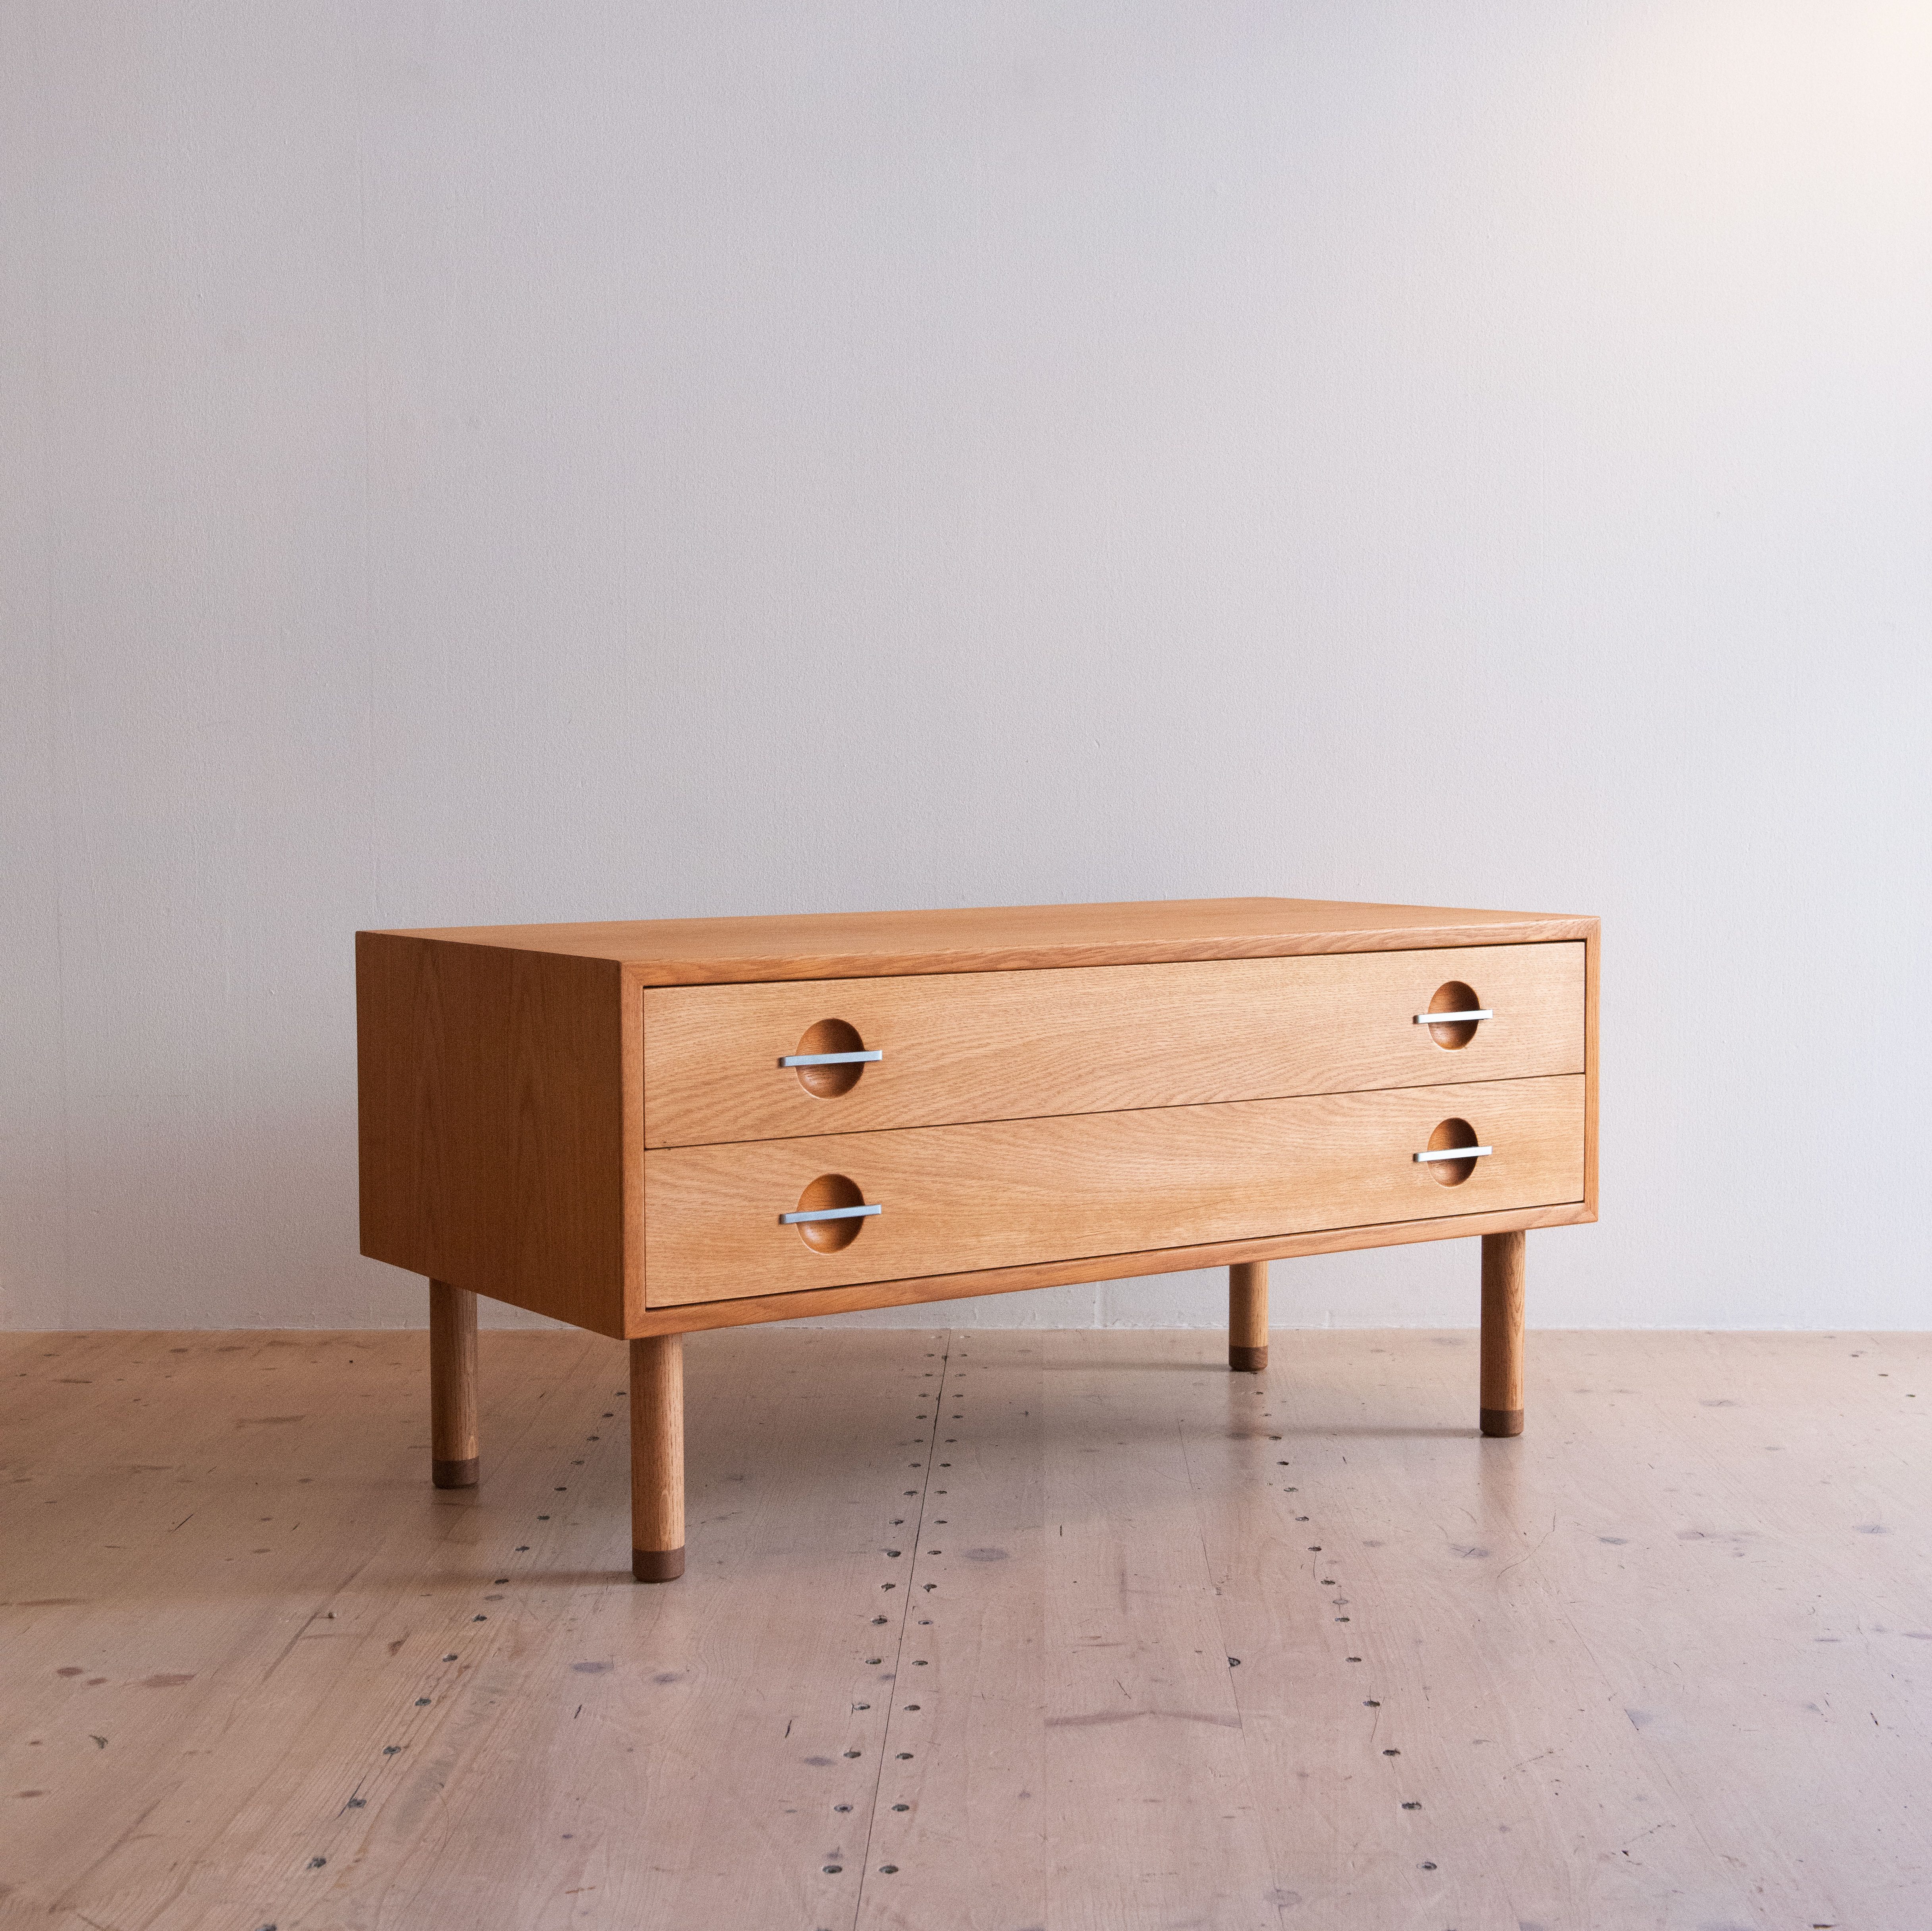 Oak Chest of Drawers by Hans J. Wegner for Ry Möbler. Produced in Denmark in the 1960s. Available at heyday möbel, Grubenstrasse 19, 8045 Zürich, Switzerland.